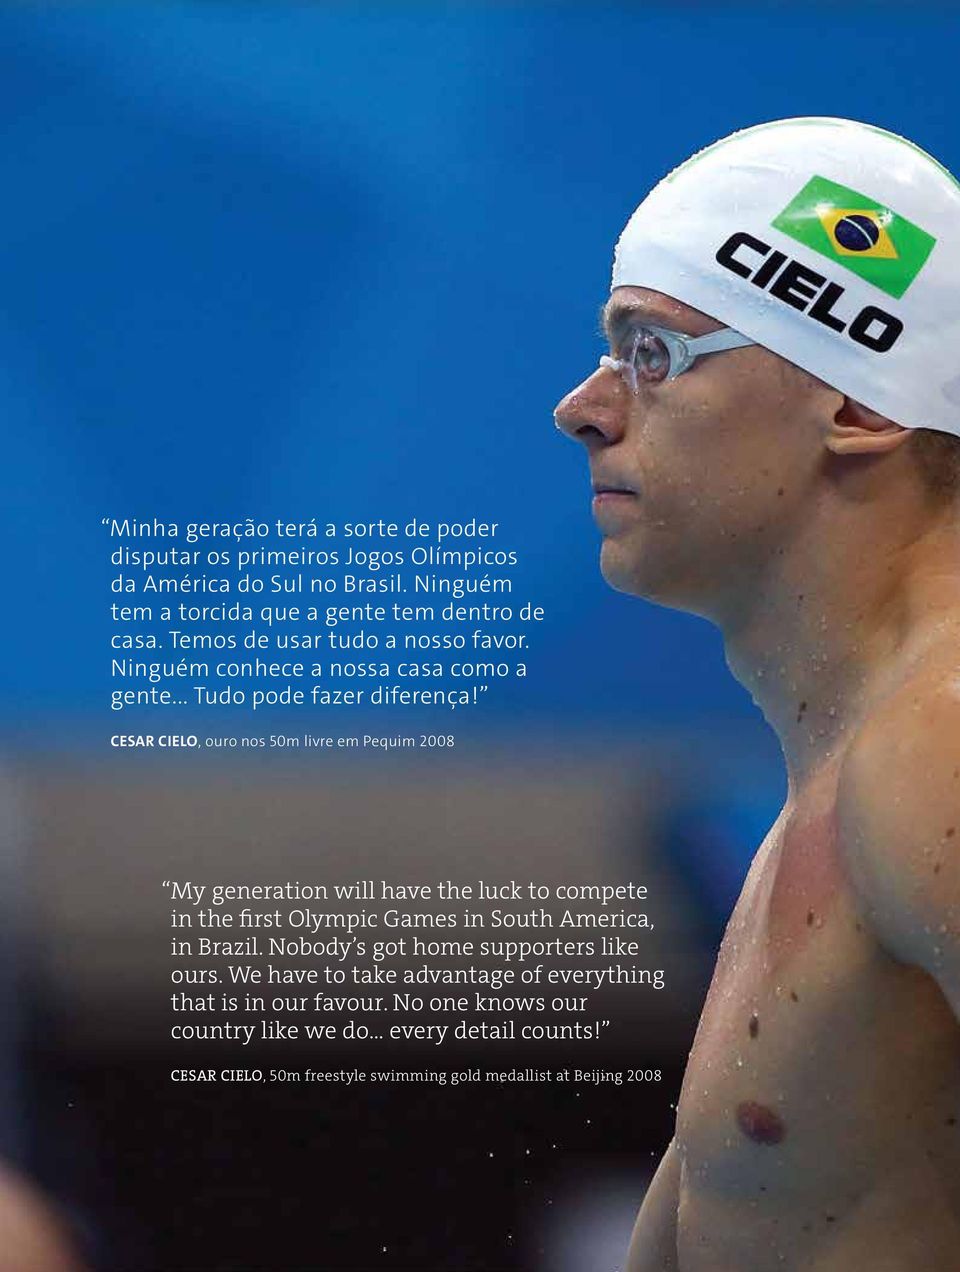 CESAR CIELO, ouro nos 50m livre em Pequim 2008 My generation will have the luck to compete in the first Olympic Games in South America, in Brazil.